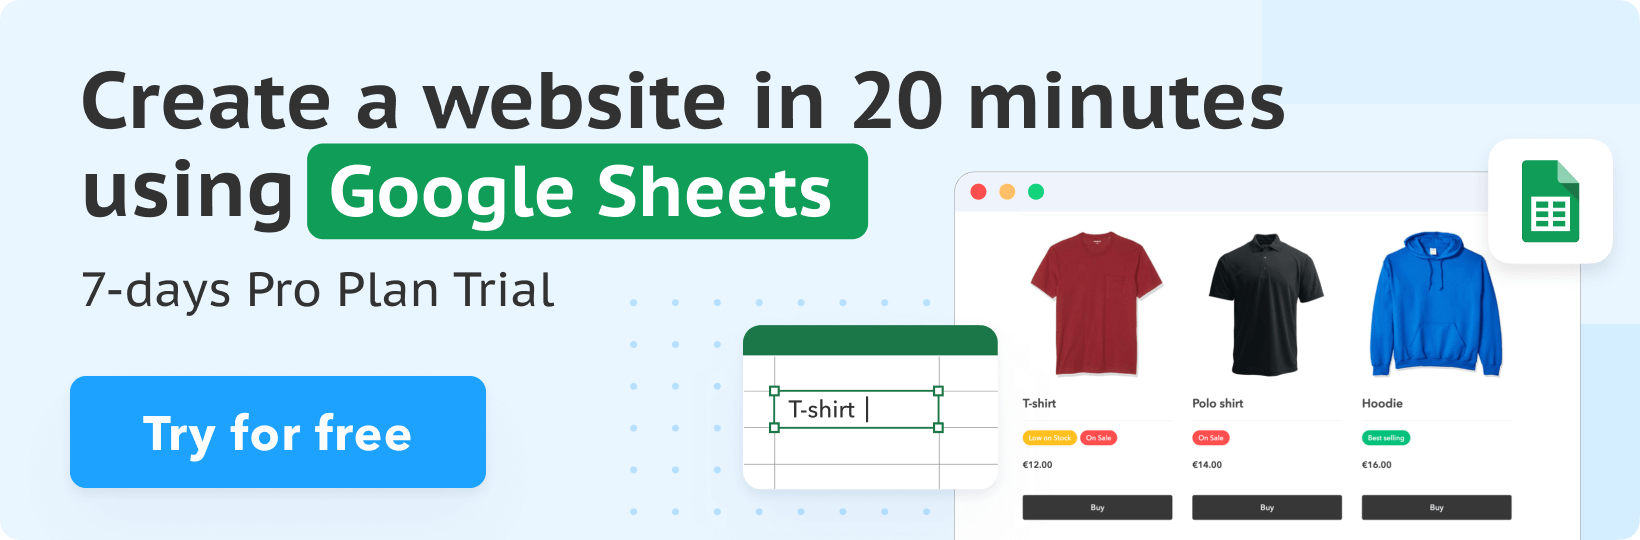 Turn your Google Sheets into a website